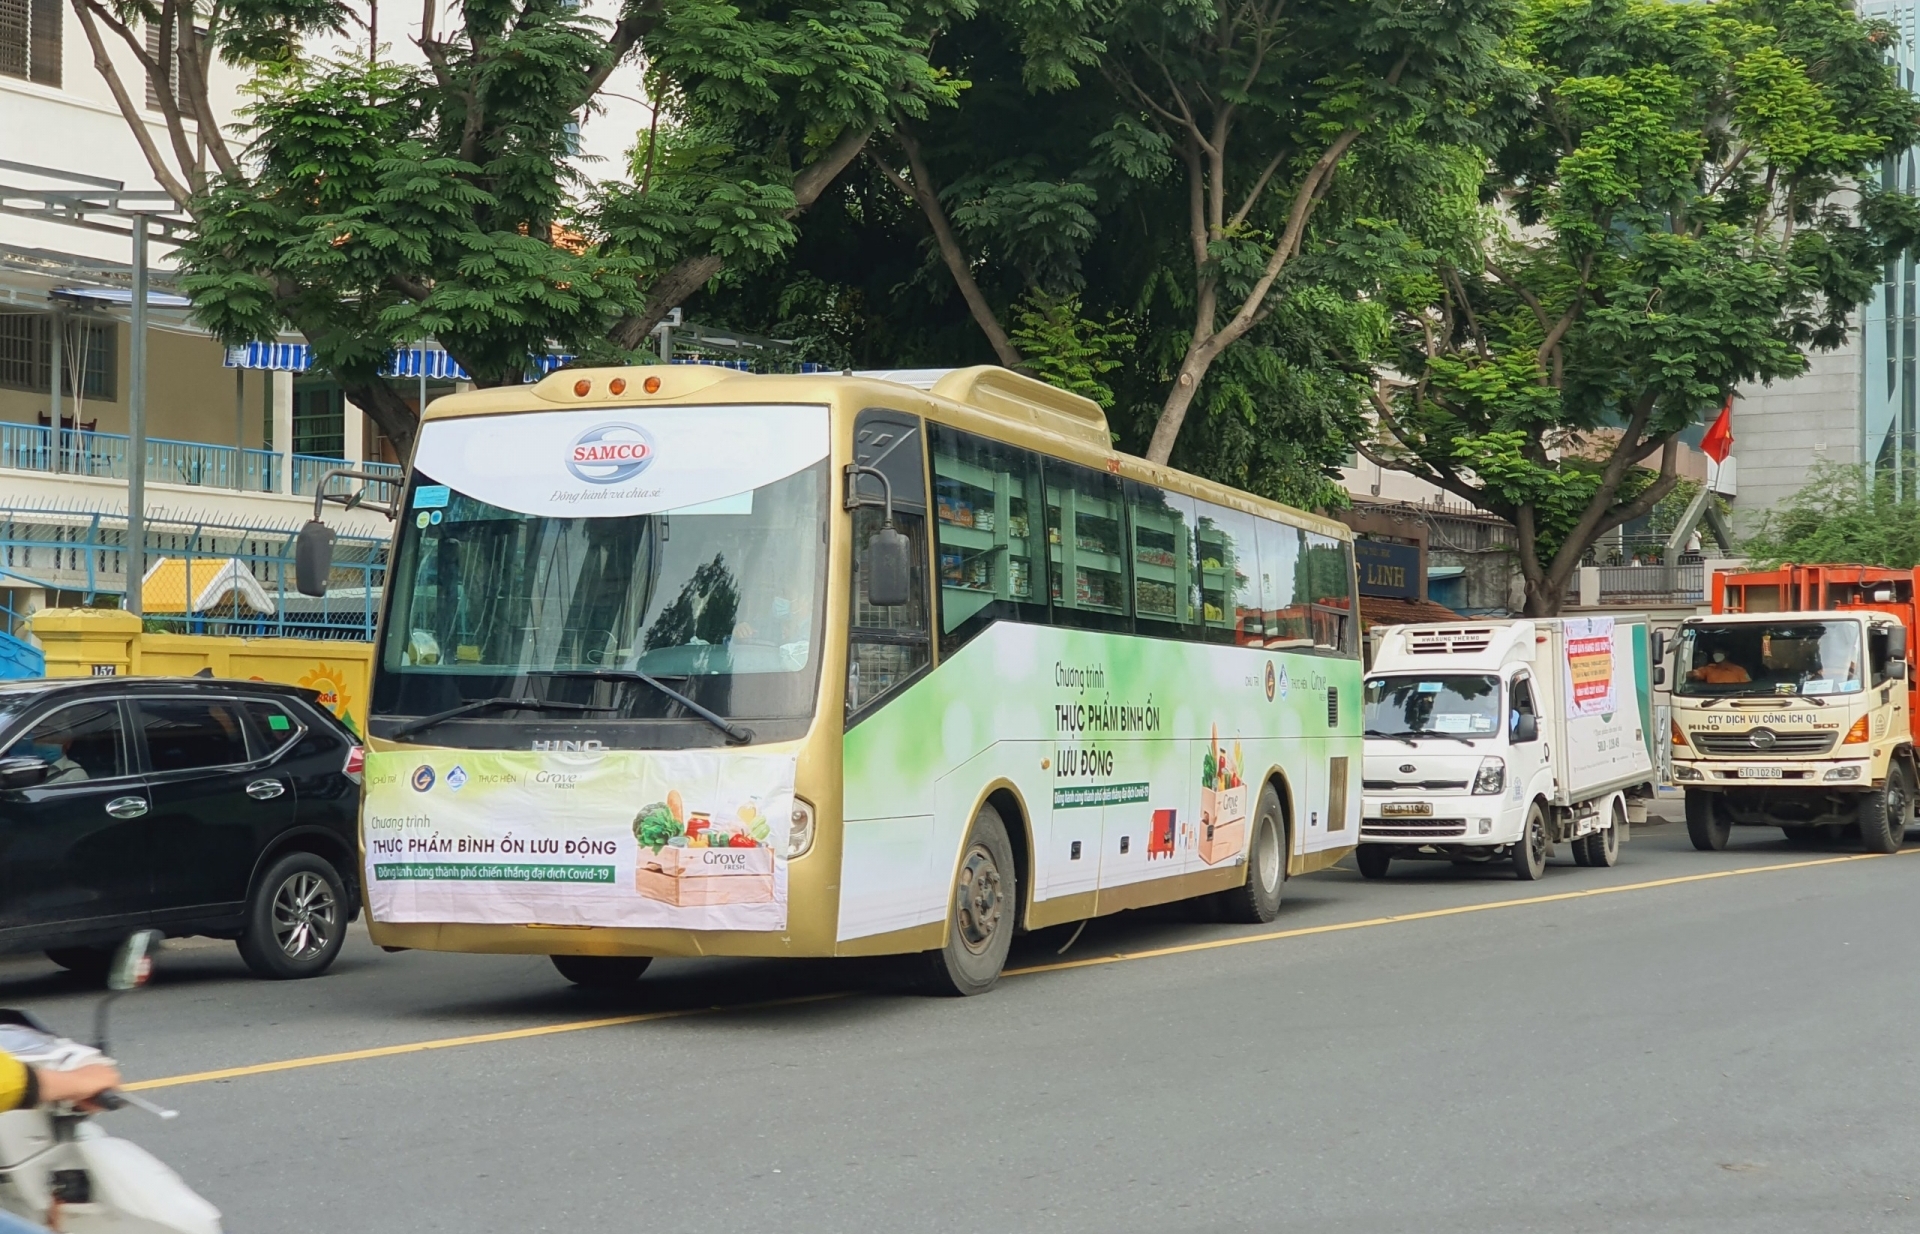 Bus converted to mini-supermarkets to sell food in Ho Chi Minh City